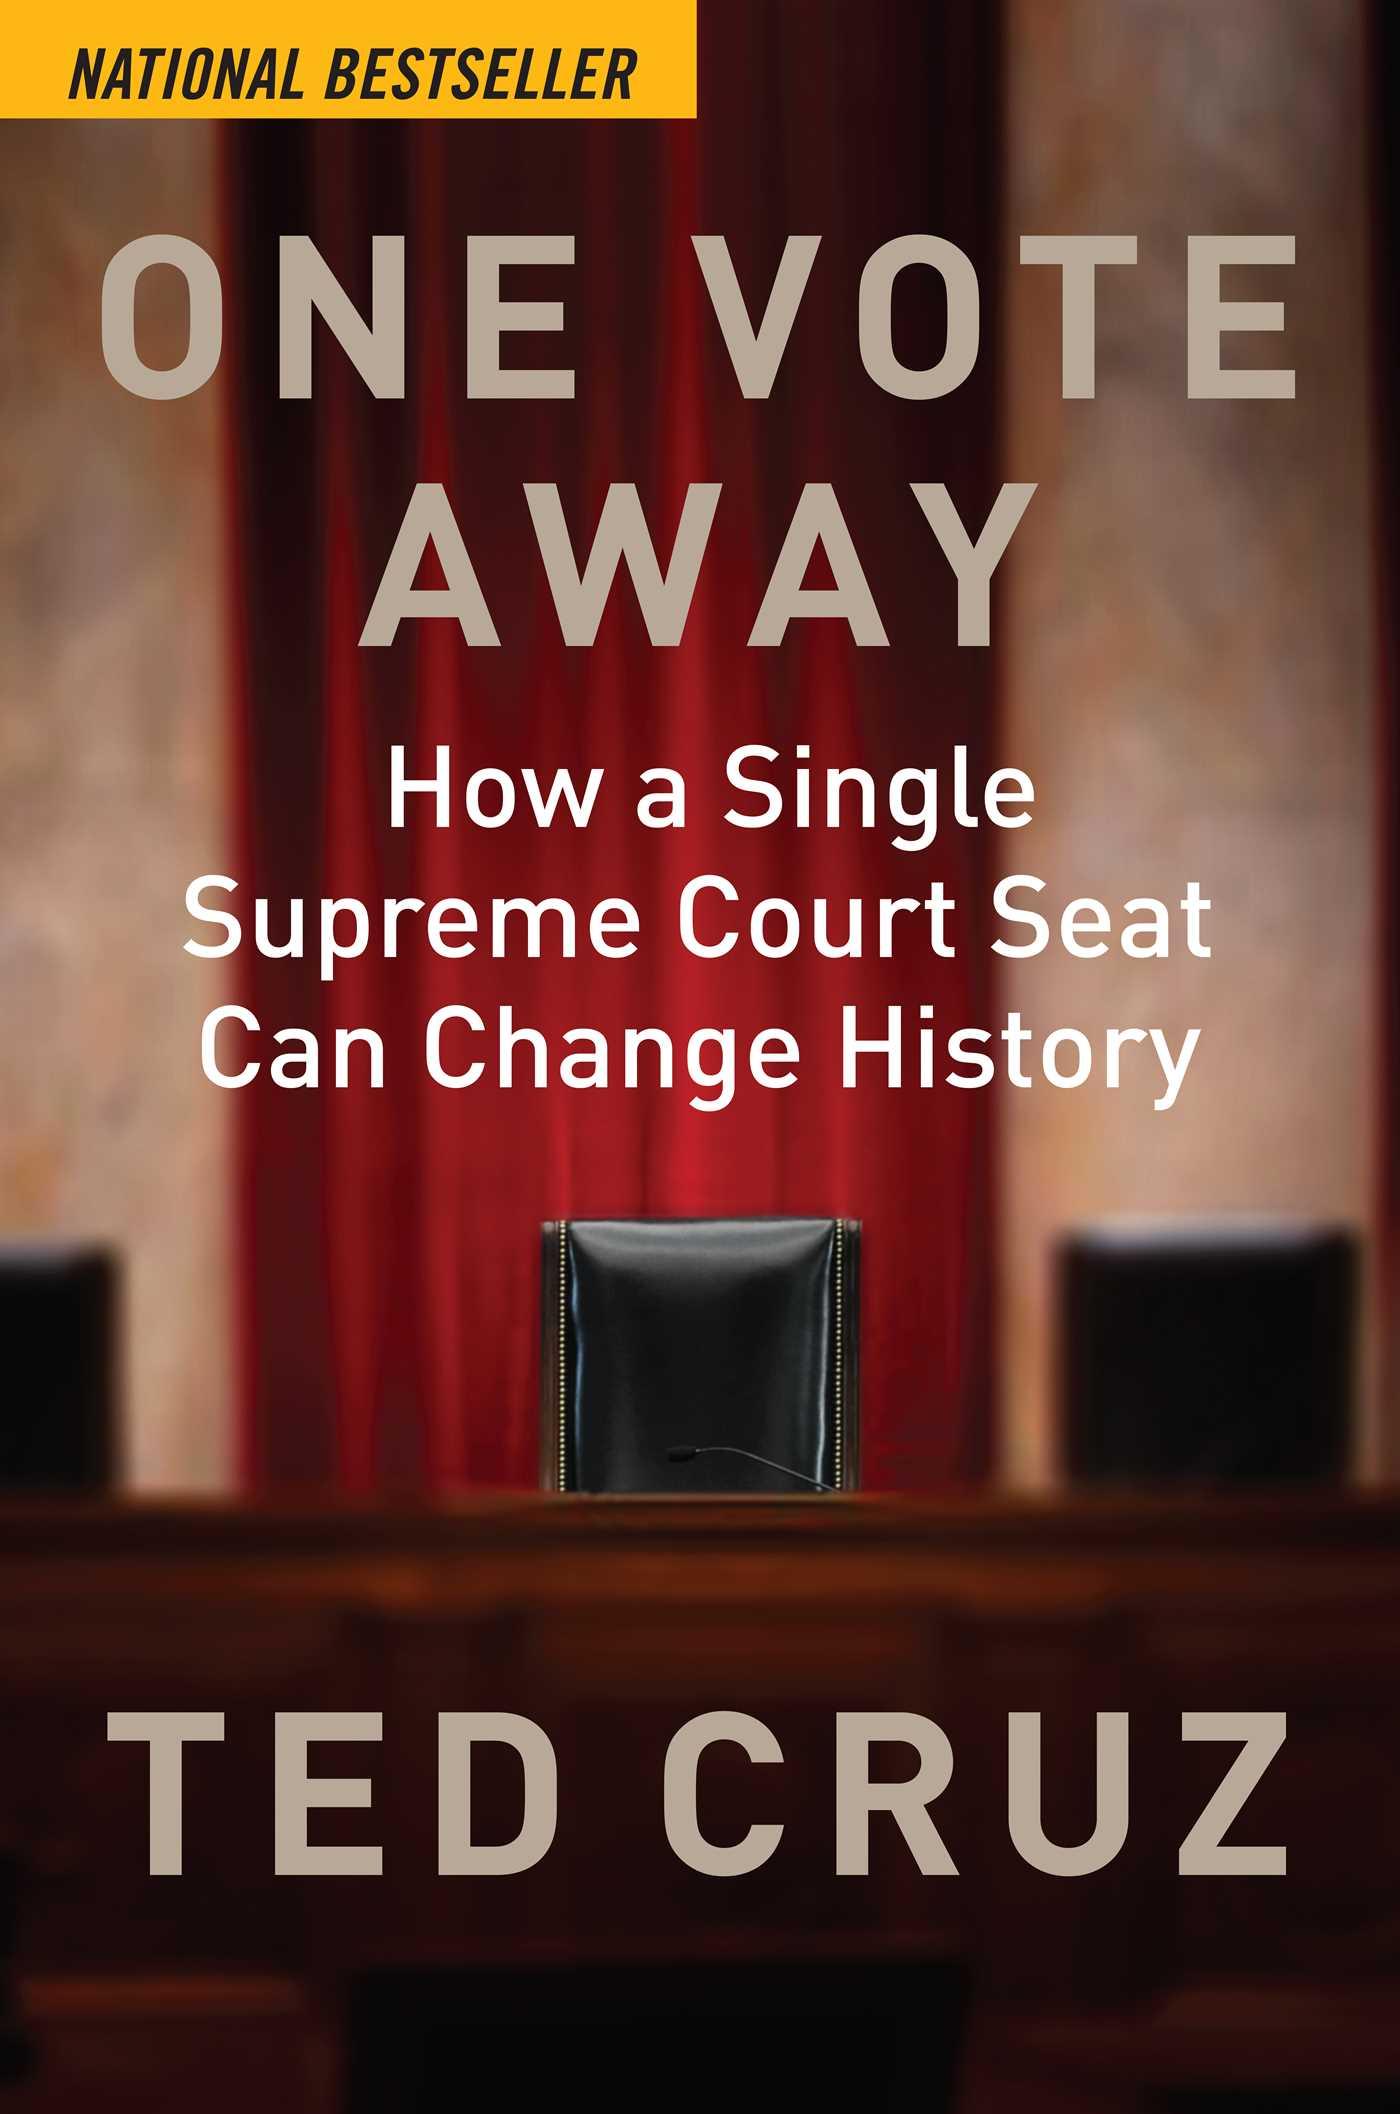 One Vote Away / How a Single Supreme Court Seat Can Change History / Ted Cruz / Buch / Gebunden / Englisch / 2020 / Regnery Publishing / EAN 9781684511341 - Cruz, Ted